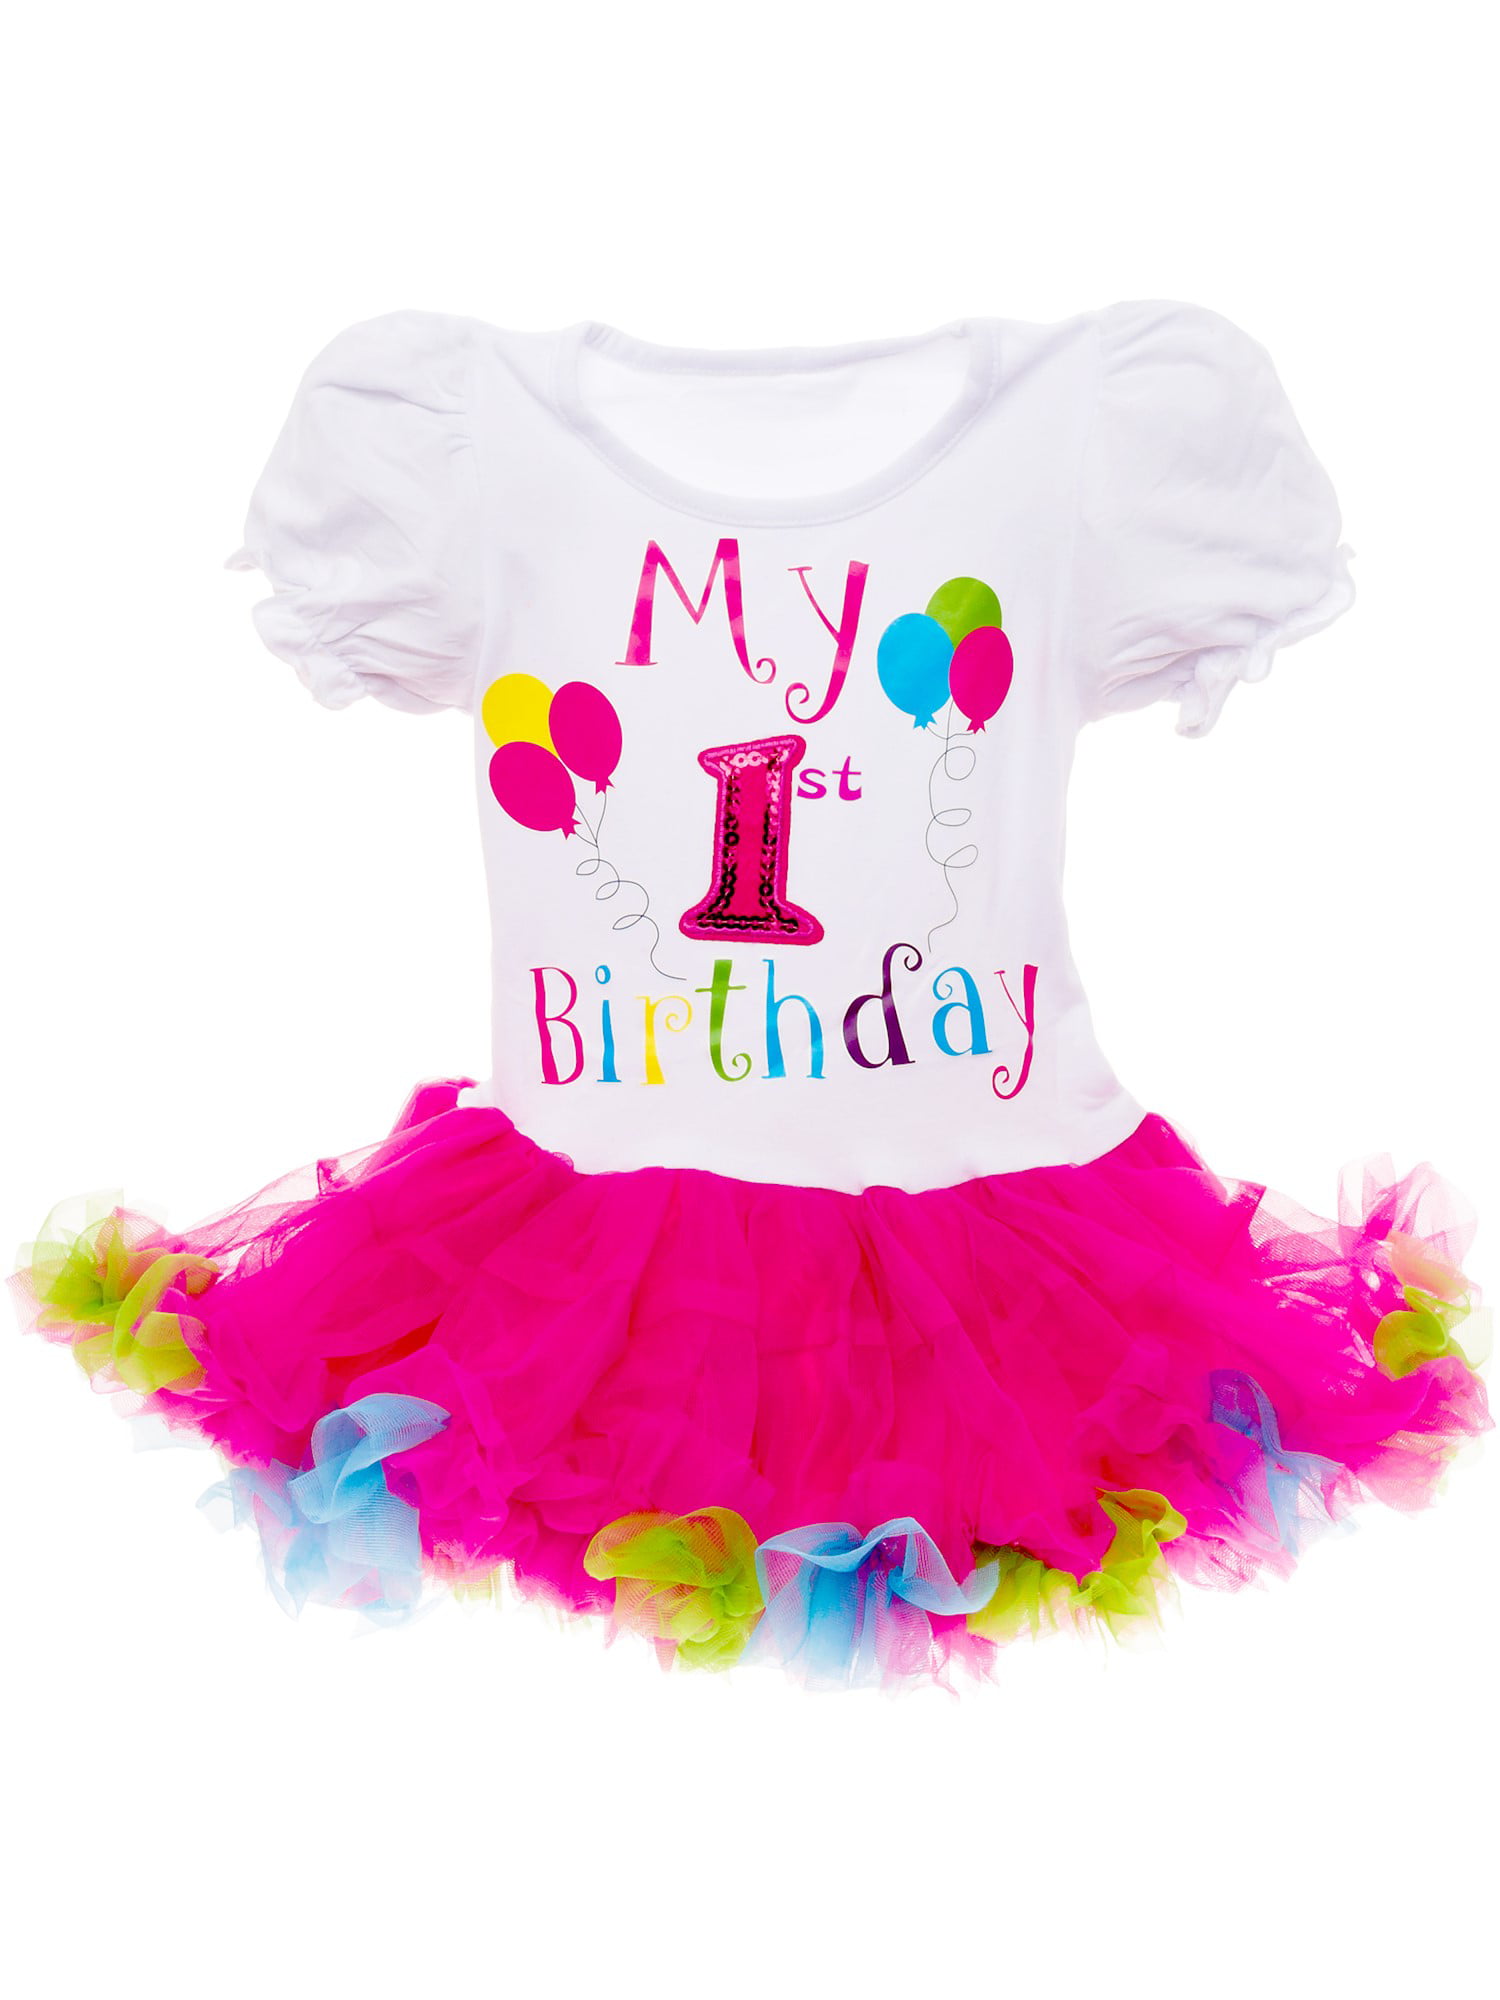 baby birthday outfit